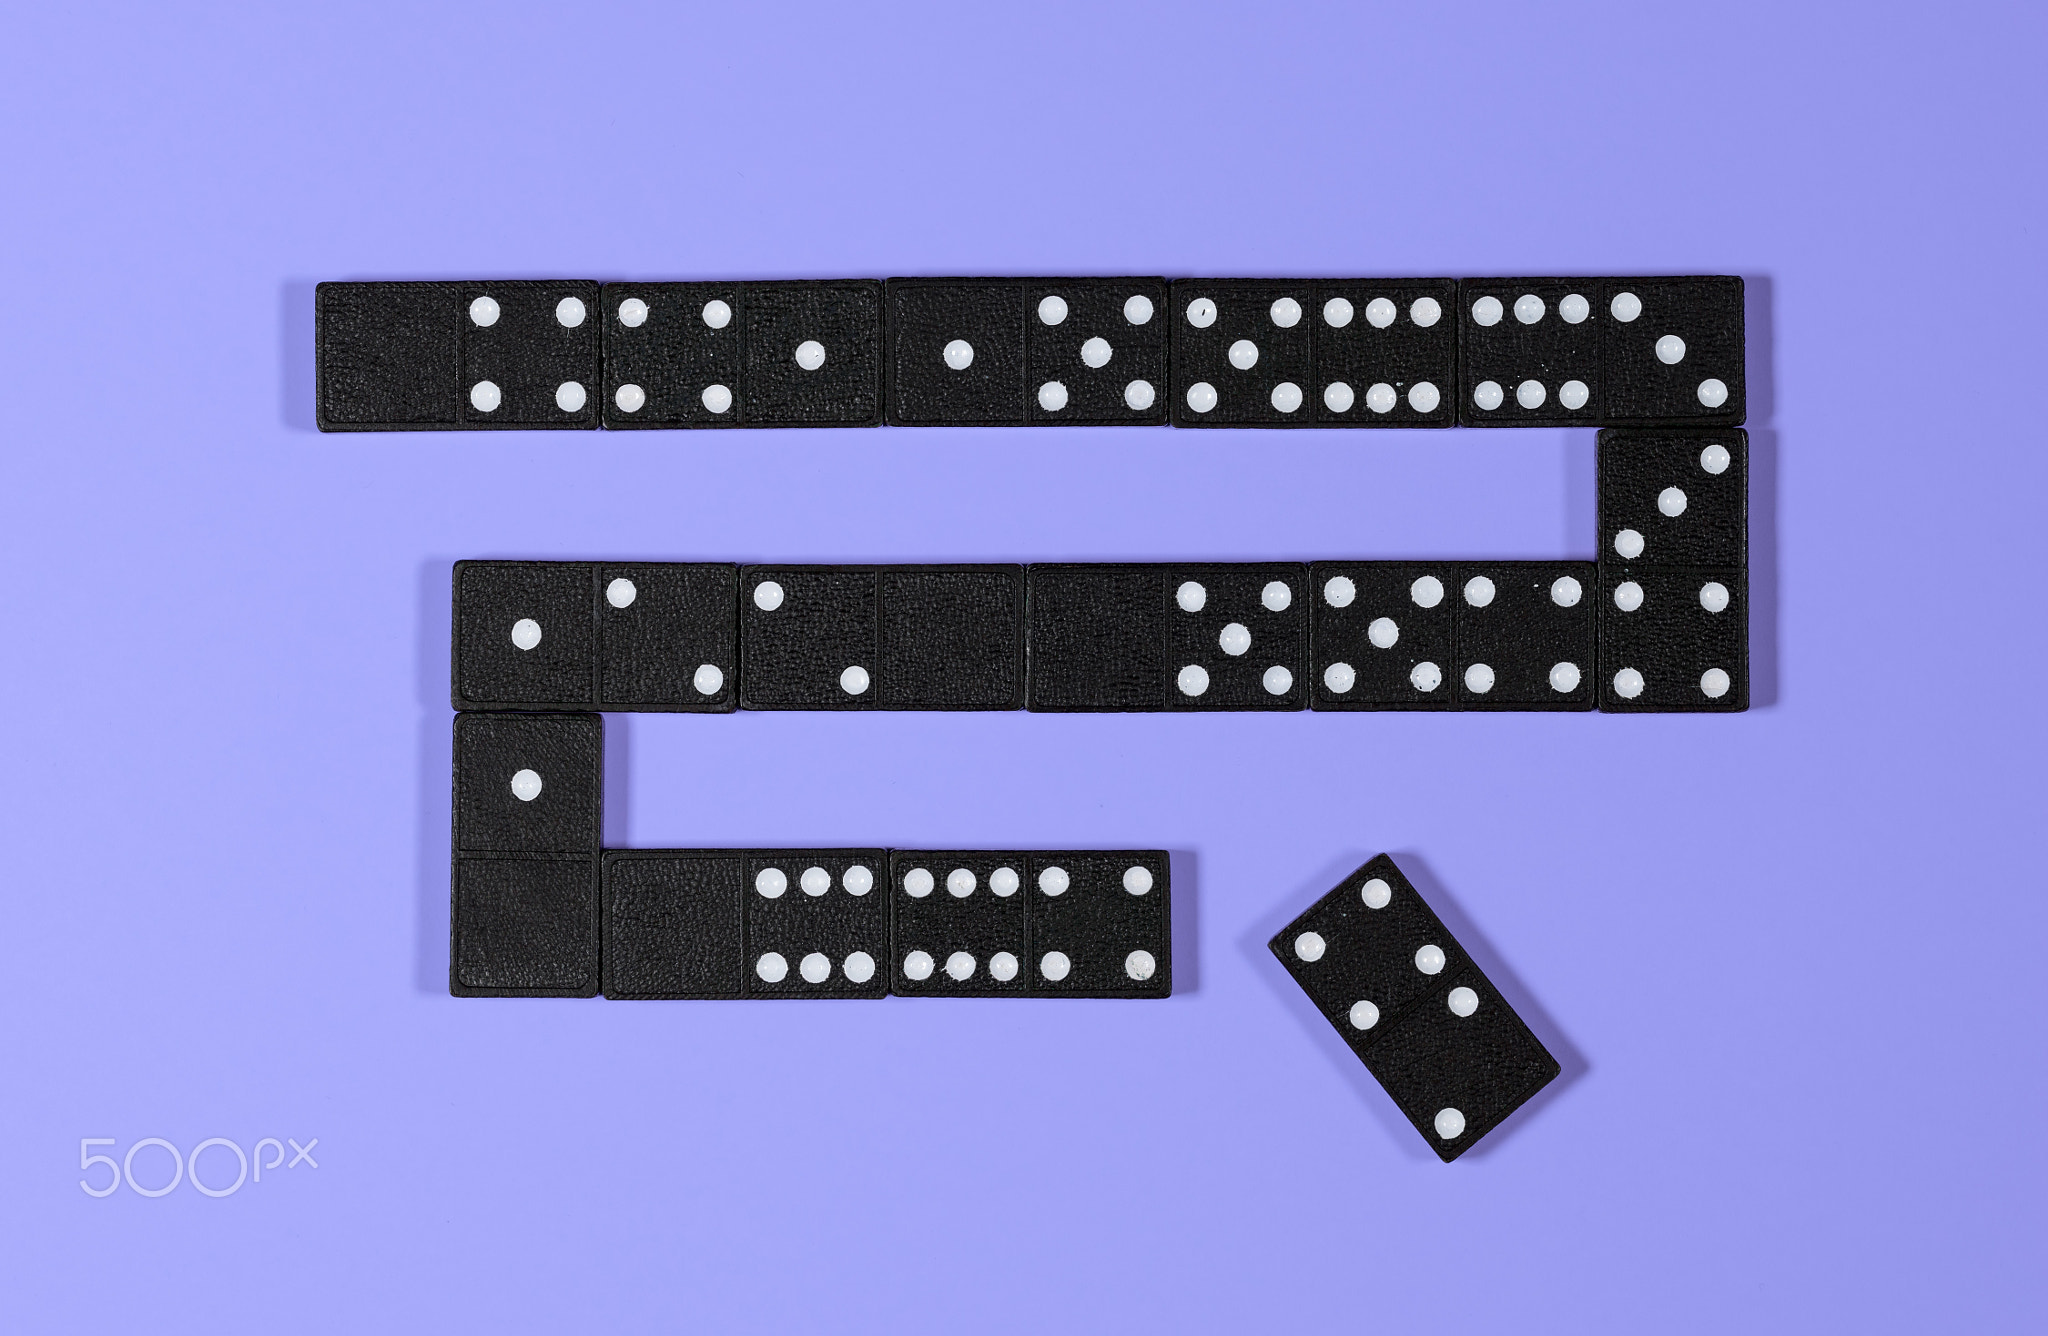 Illustraton or schematic of blockchain with dominoes